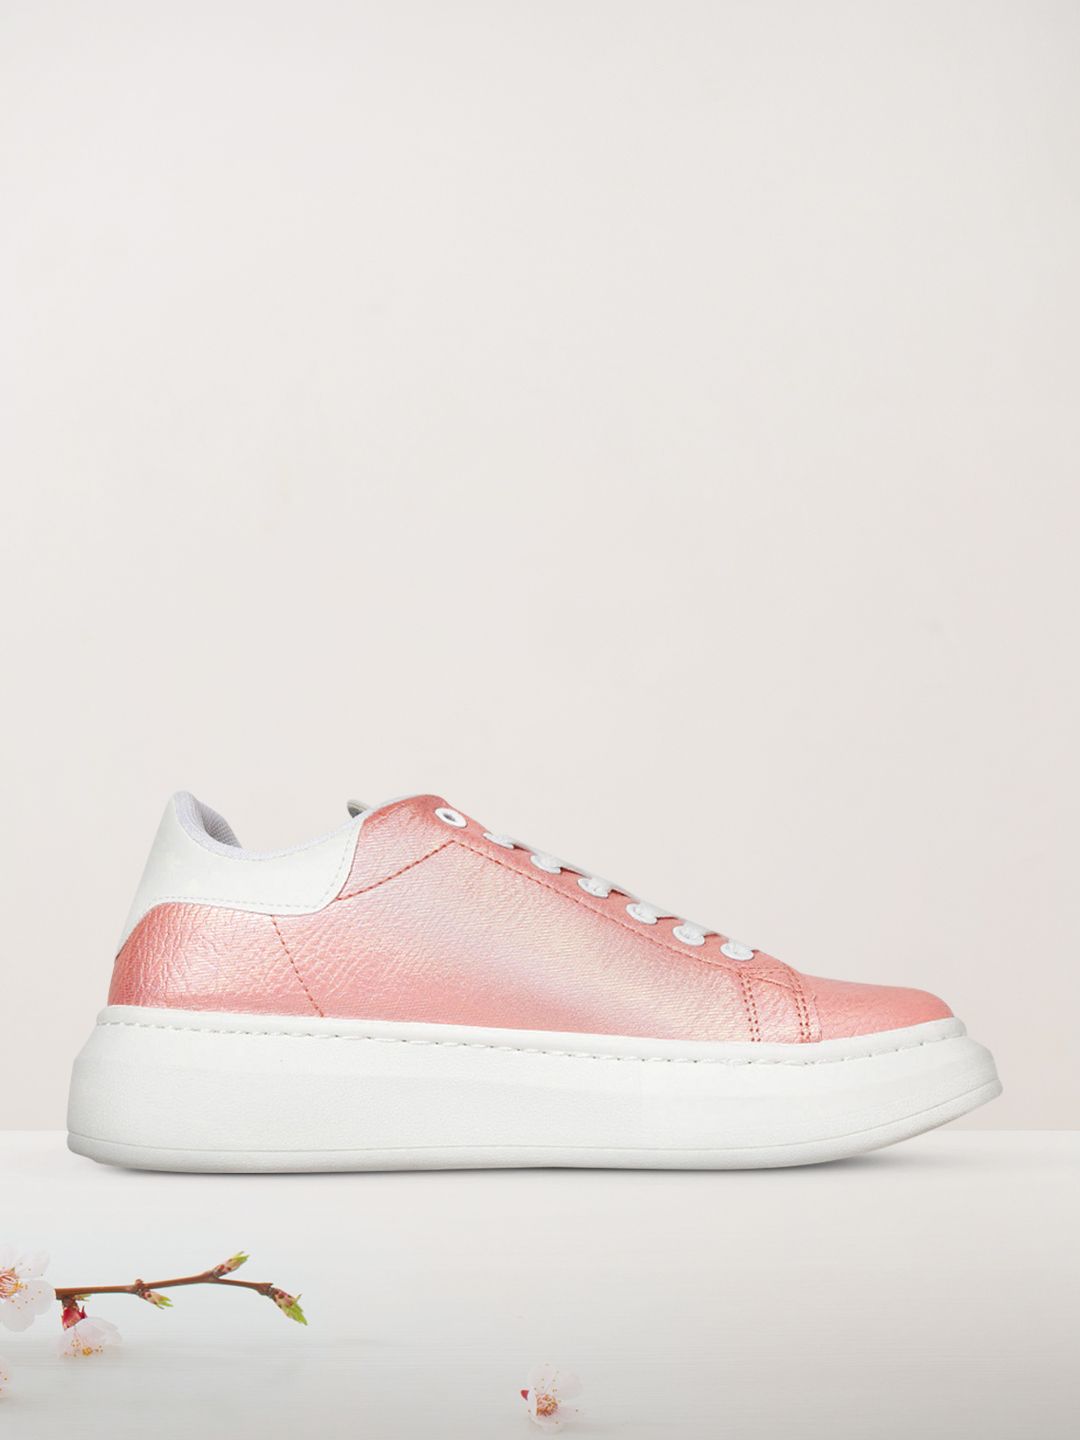 Mast & Harbour Women Peach-Coloured Iridescent Effect  Perforated Detail Flatform Sneakers Price in India